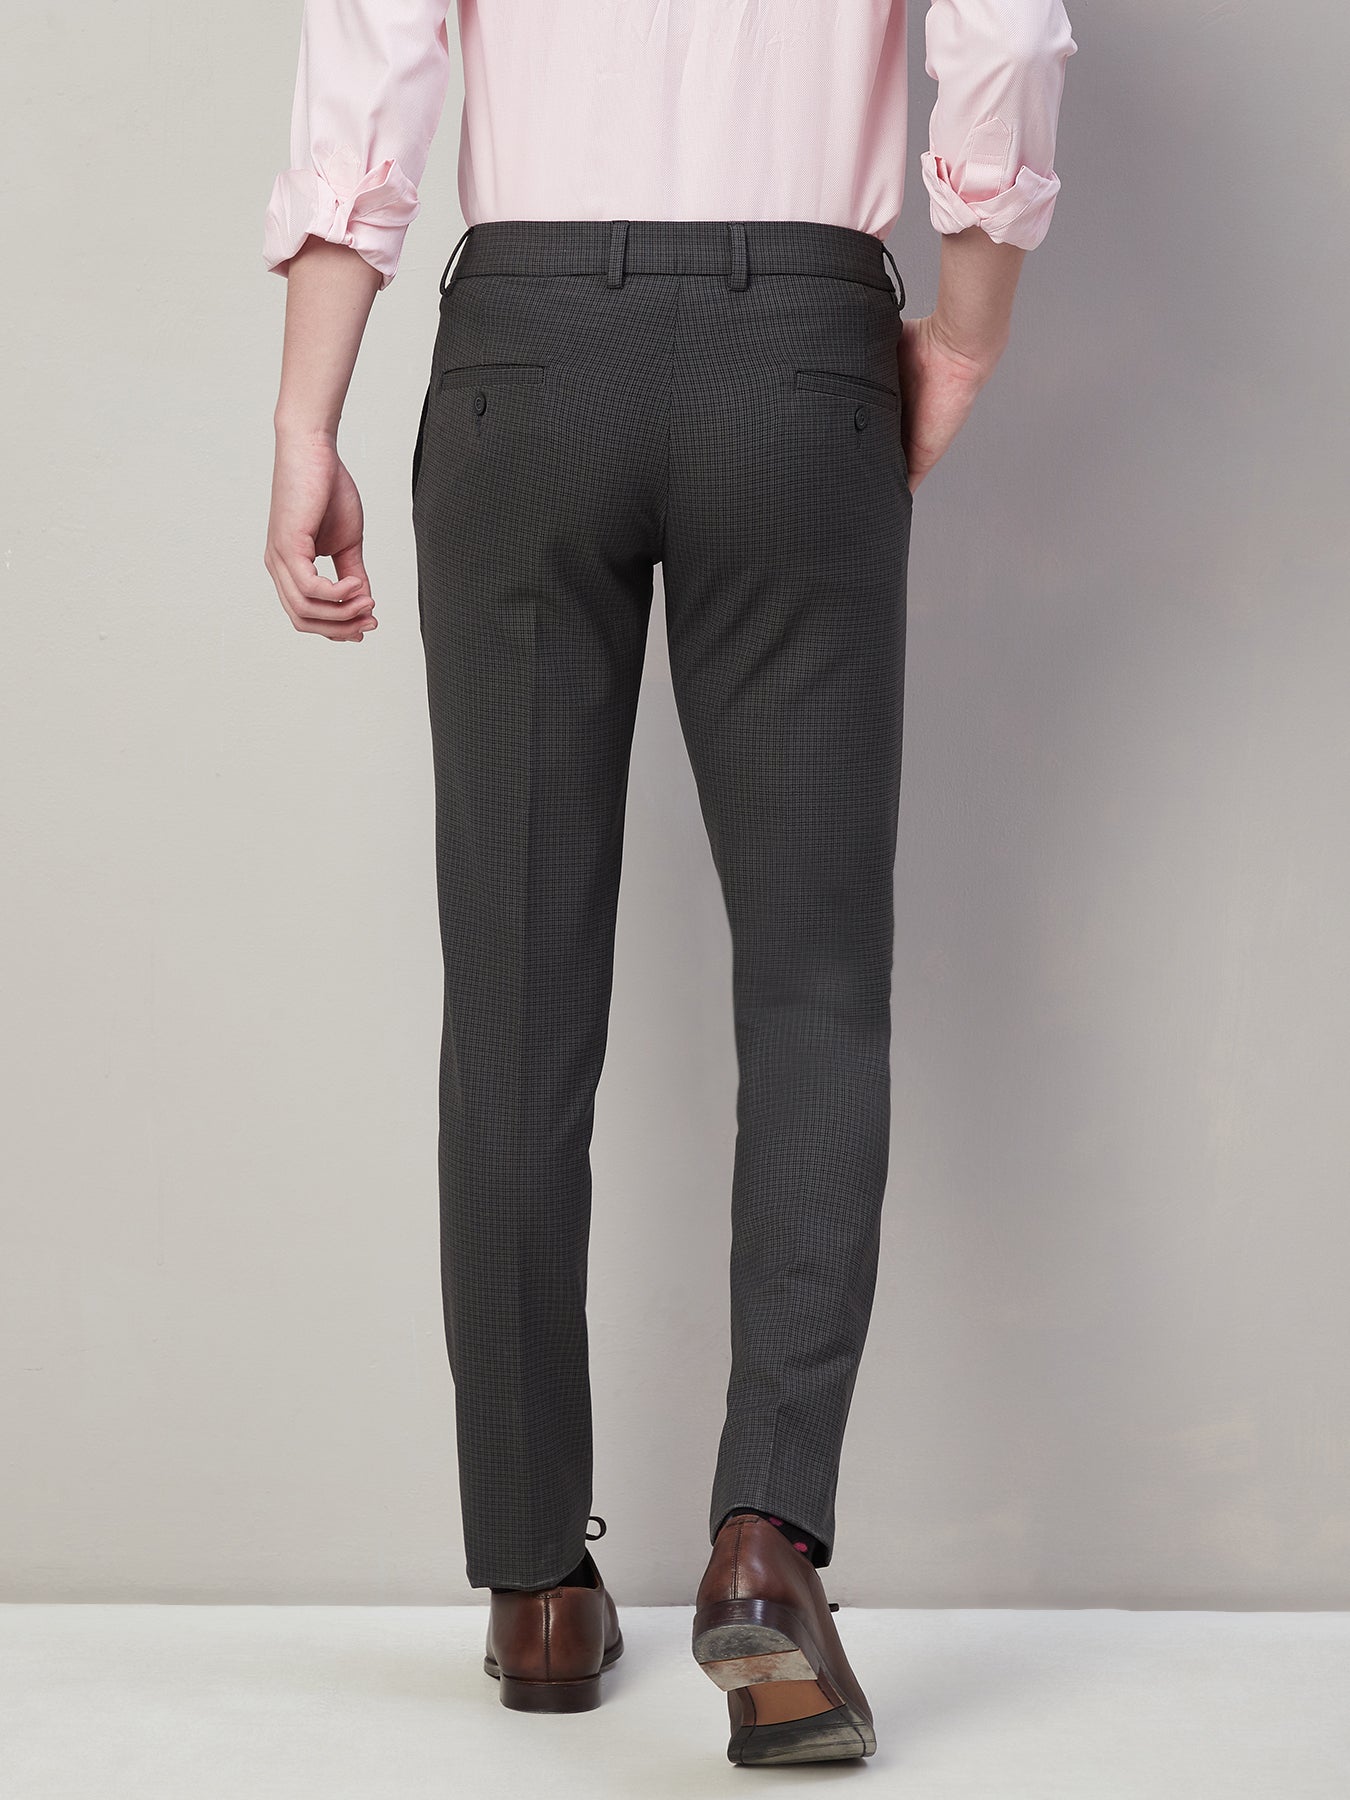 Cotton Stretch Charcoal Checkered Ultra Slim Fit Flat Front Formal Trouser